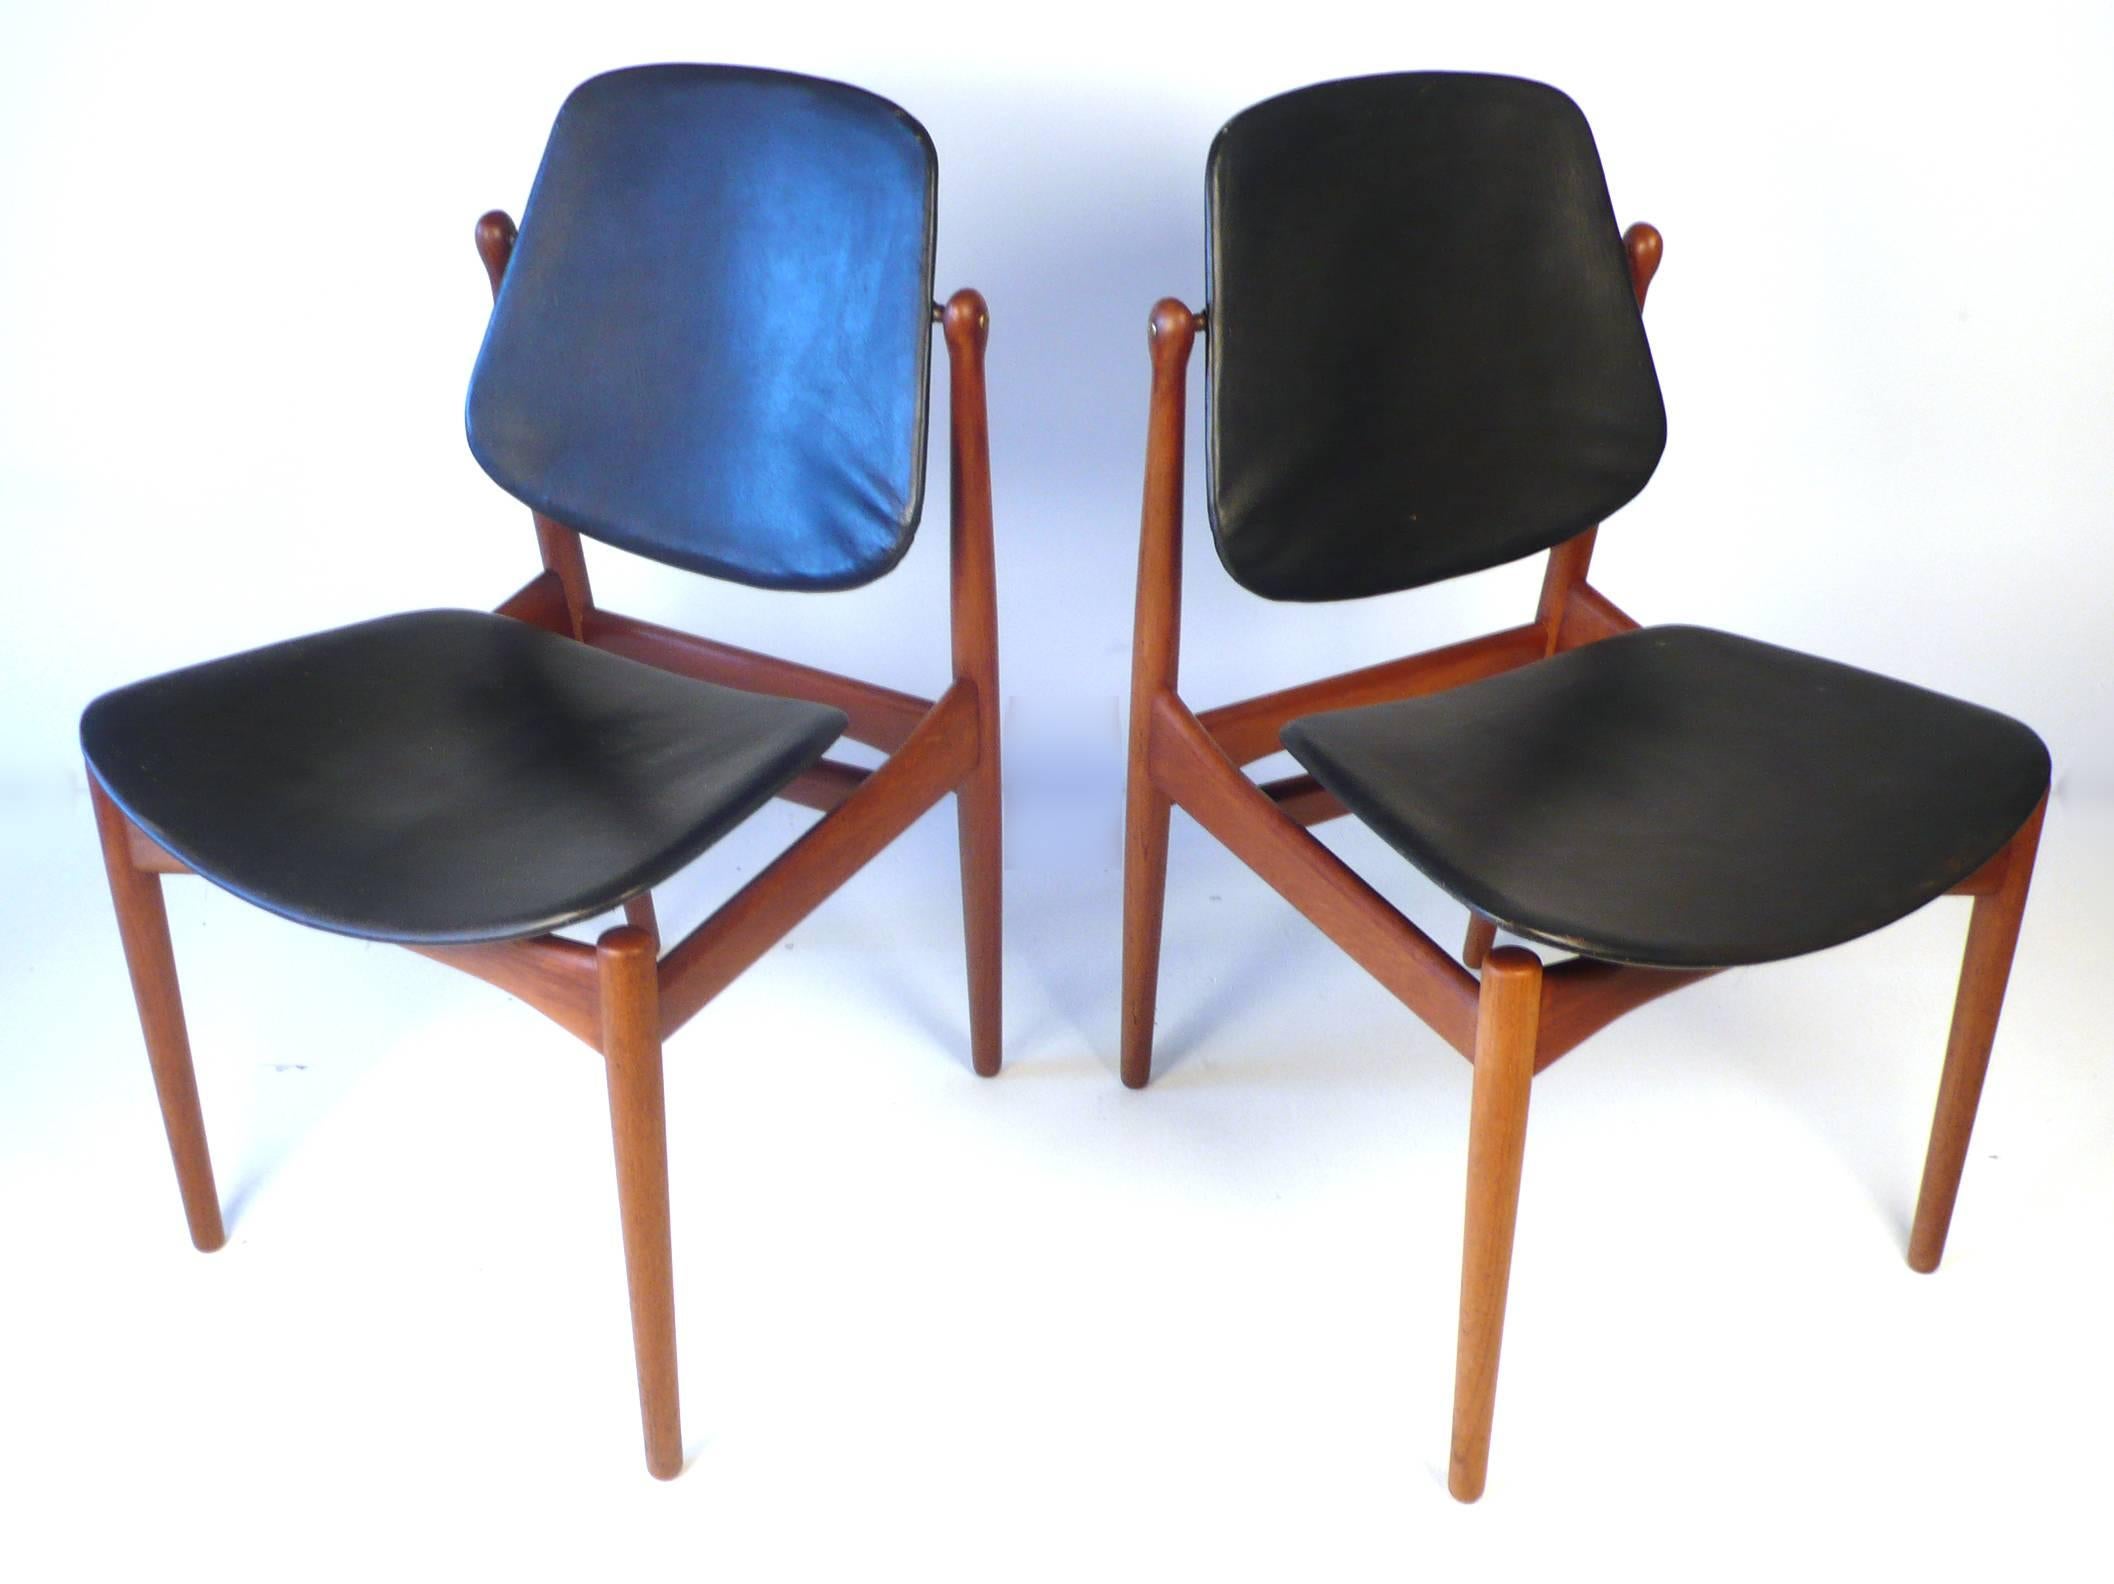 Six Danish modern Arne Vodder solid teak dining chairs manufactured by France and Son of Denmark. These are thought by many to be the best of Vodder's dining chair designs. Signed with brass medallions and embossed insignia. The tilting backs cradle